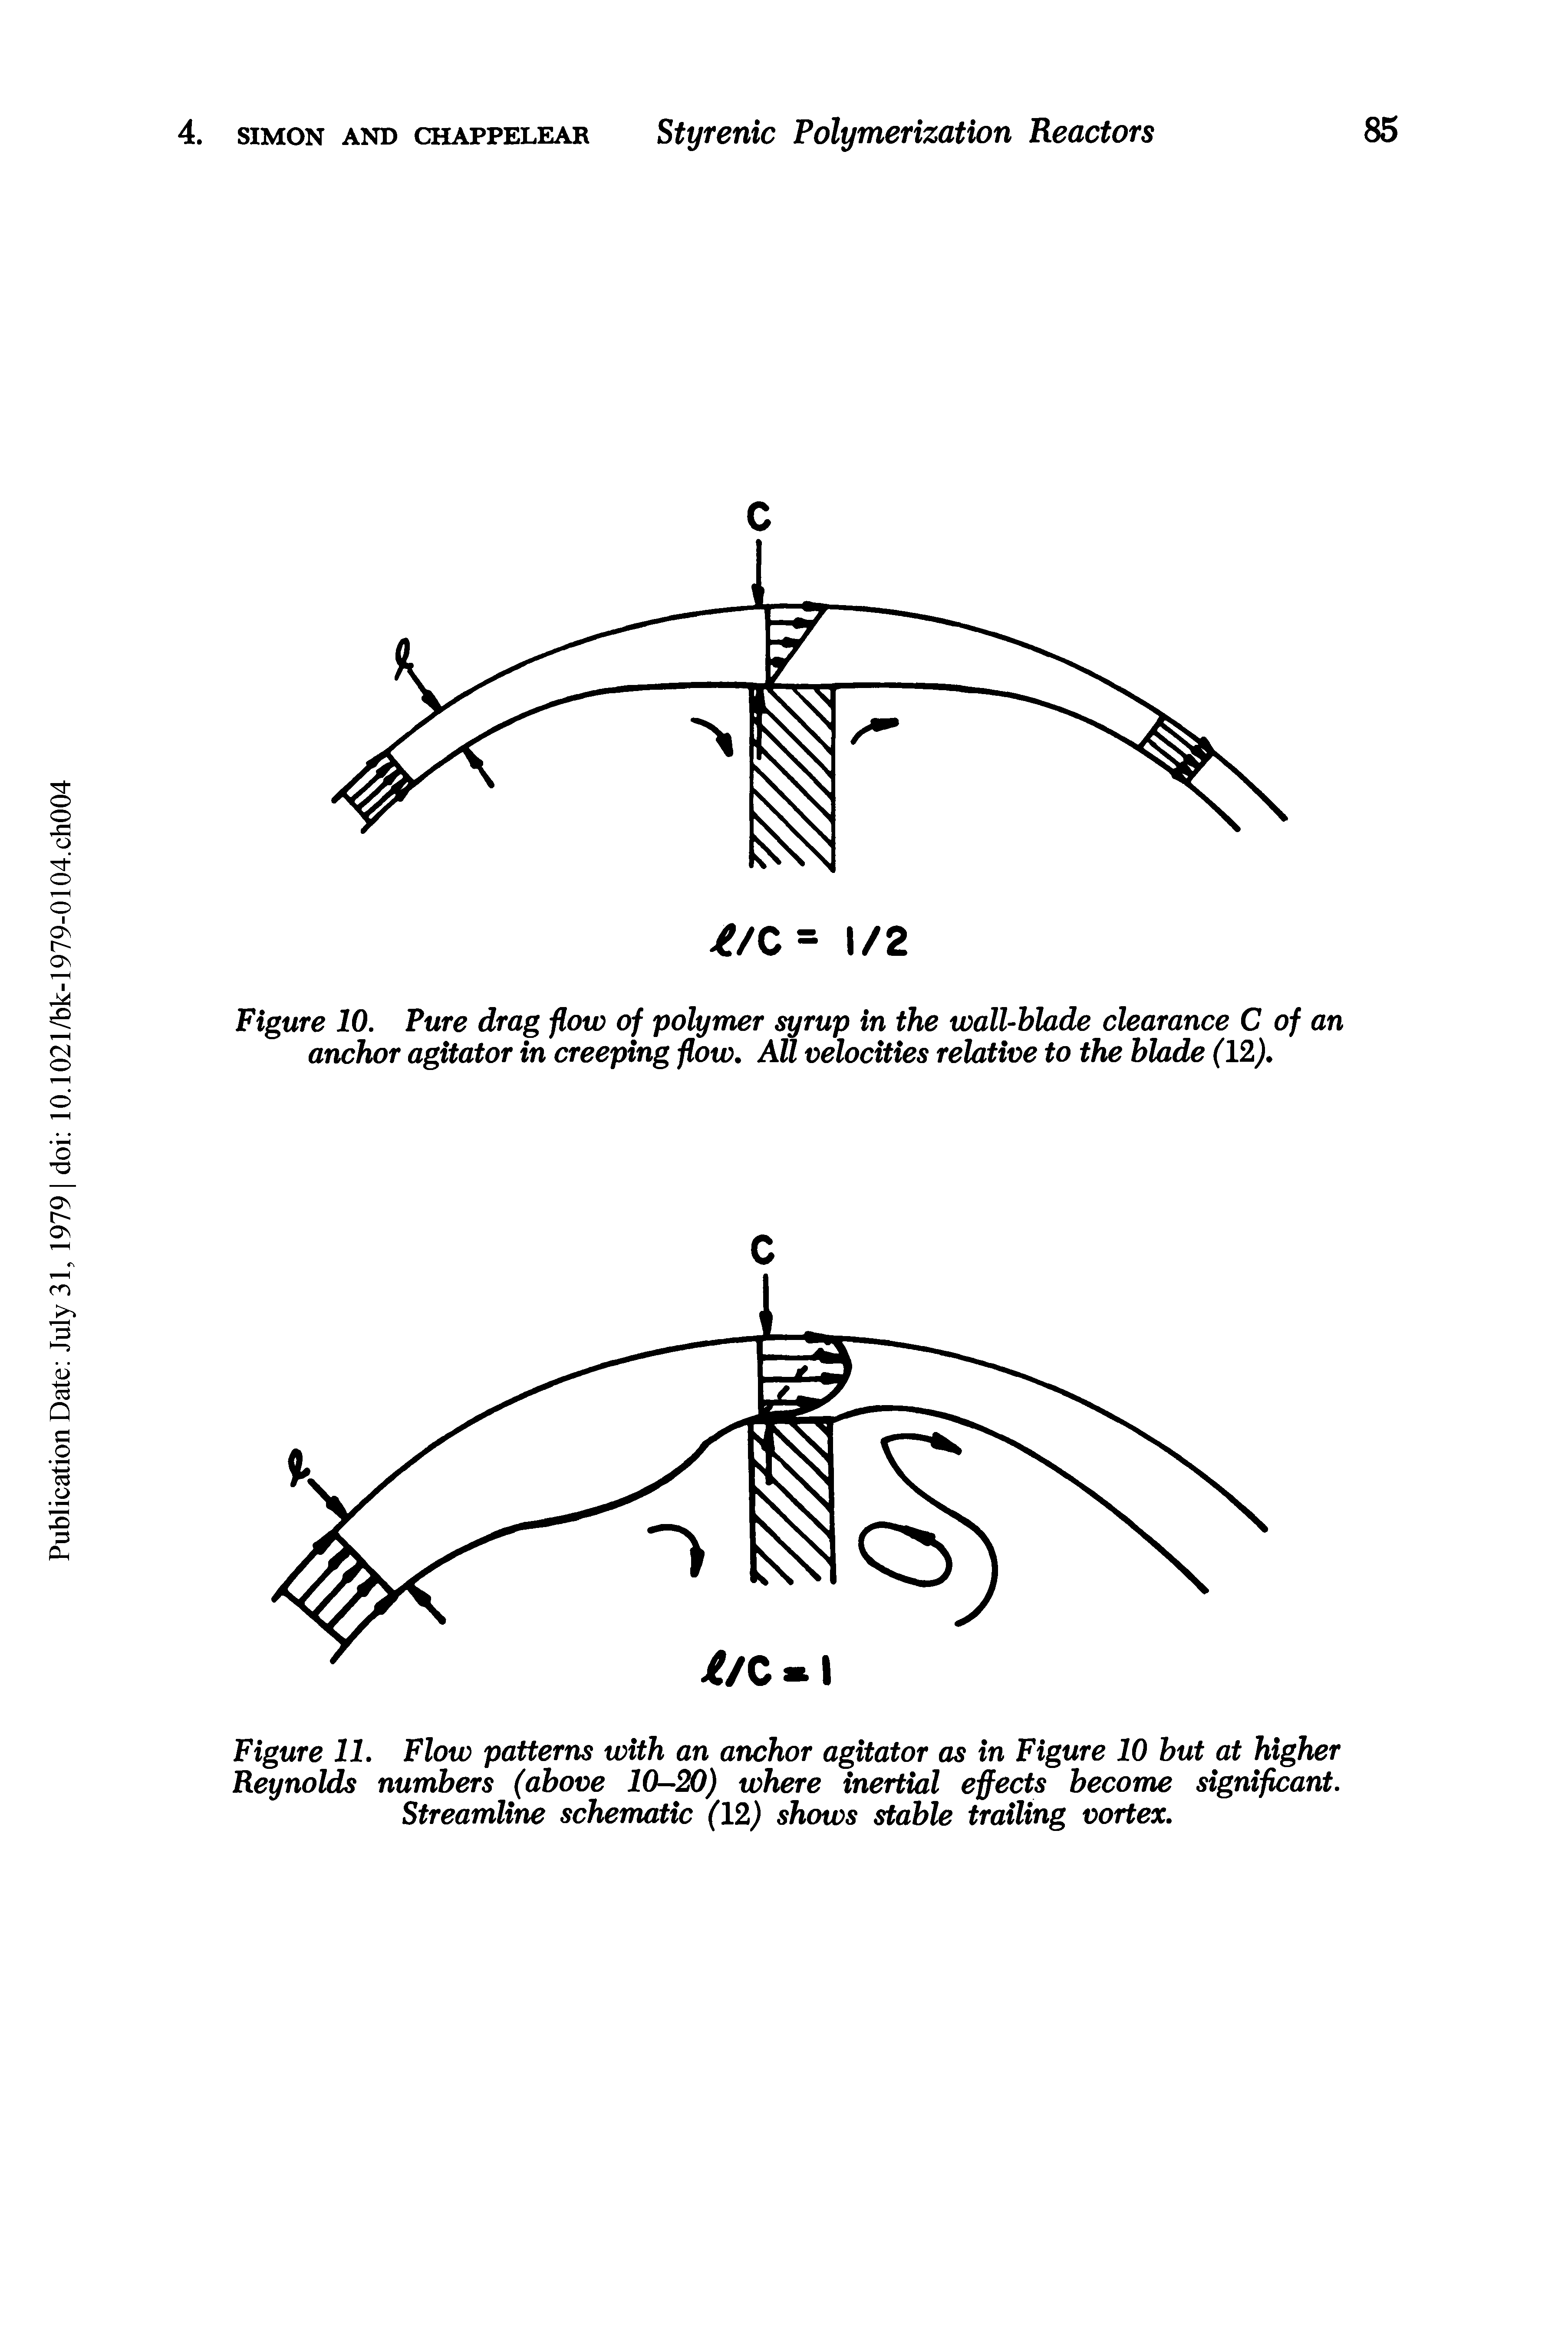 Figure 11. Flow patterns with an anchor agitator as in Figure 10 but at higher Reynolds numbers (above 10-20) where inertial effects become significant. Streamline schematic (12) shows stable trailing vortex.